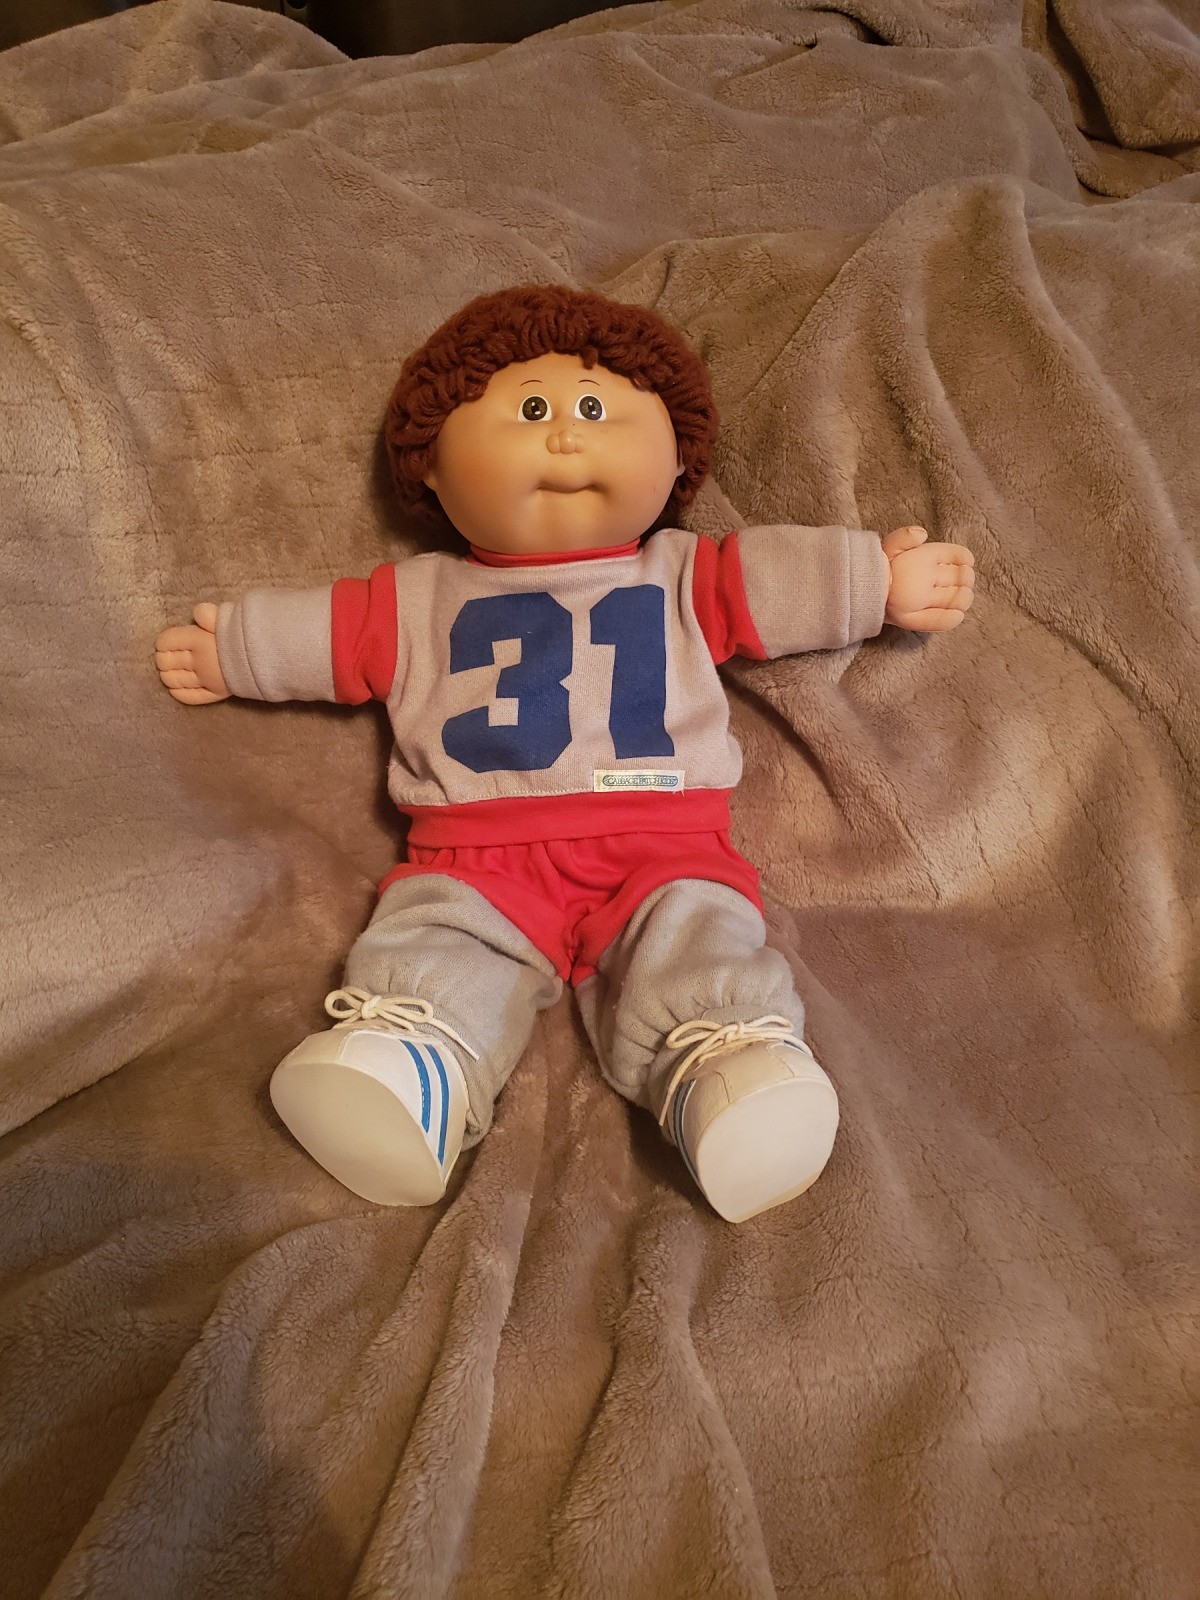 cabbage patch dolls 1980s value